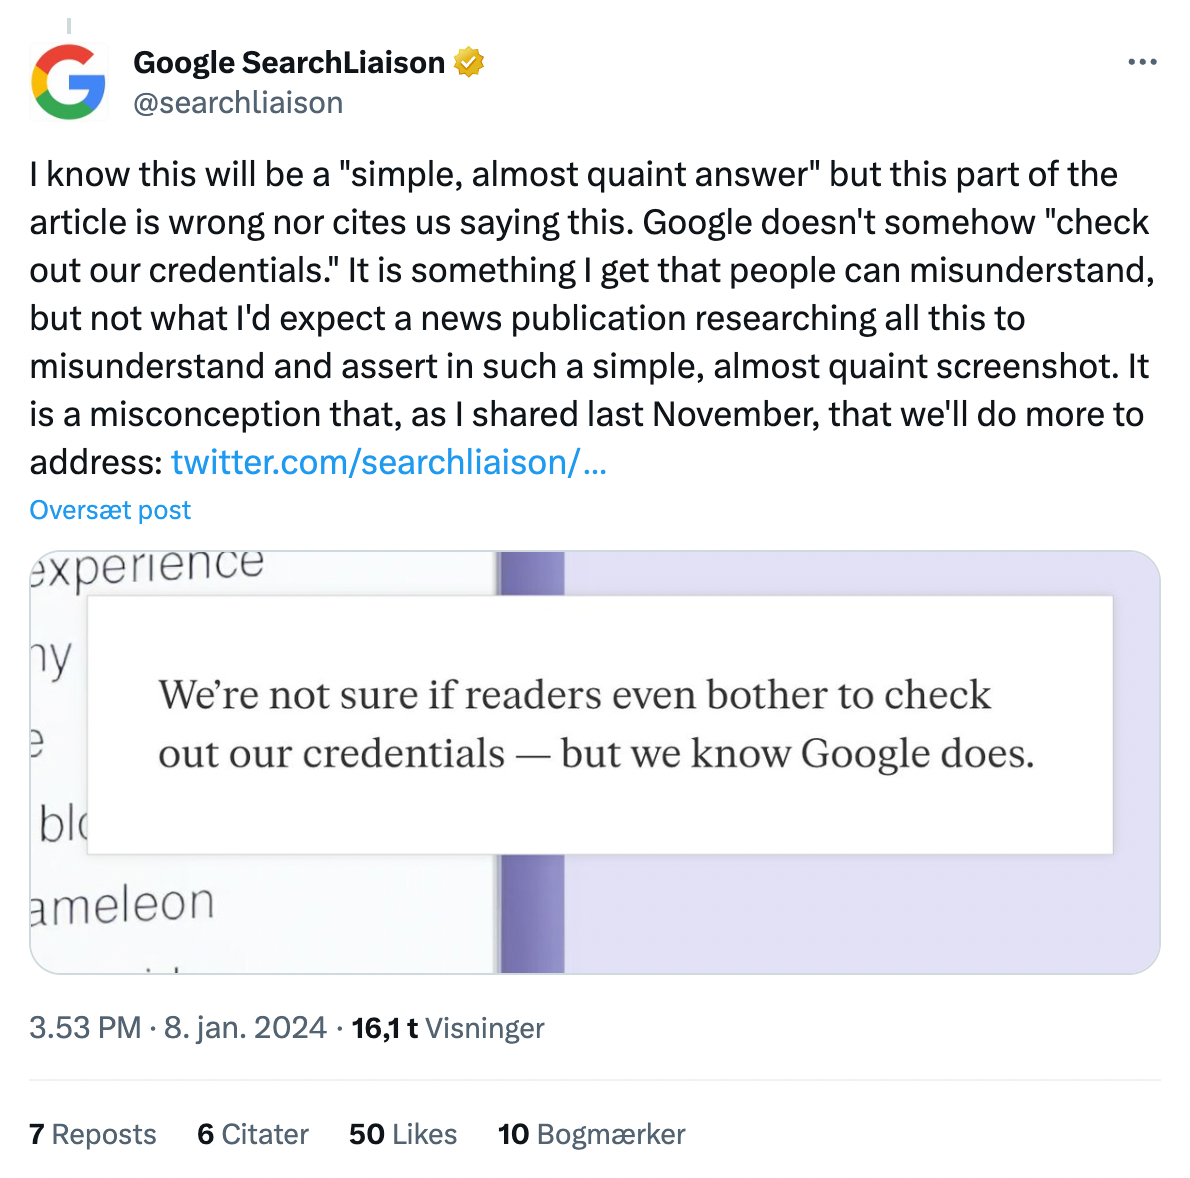 google searchliaison on author bylines